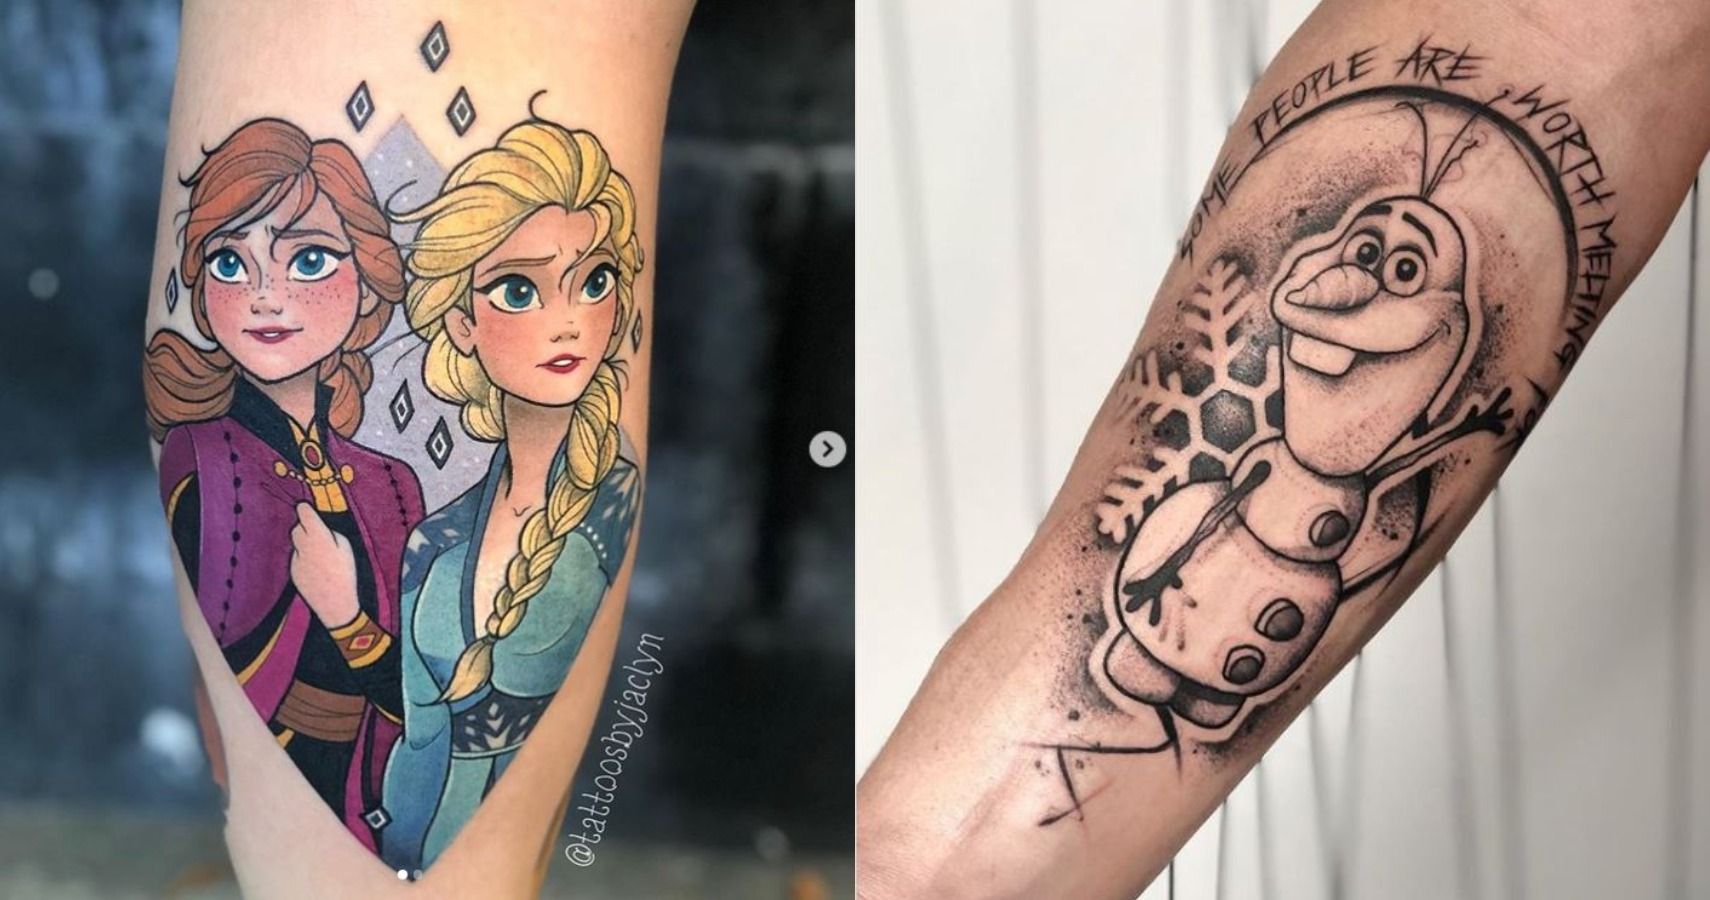 And again…. FROZEN 3 IS CONFIRMED. Elsa should take me out , got me on my  knees and all #tattoo #tattoos #tattooed #tattooartist #ta... | Instagram